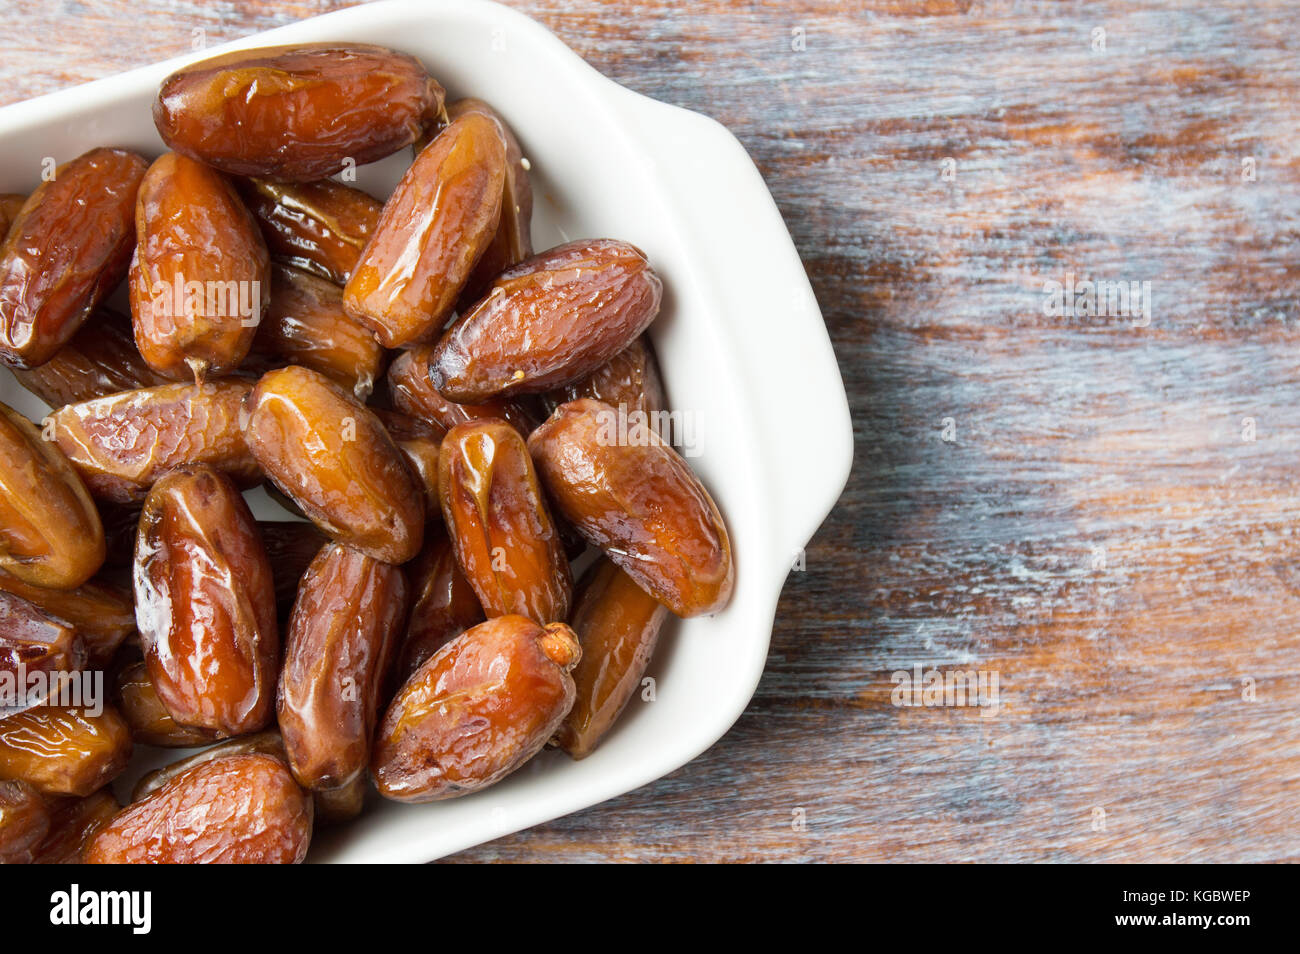 Bunch of dried date fruits on a plate Stock Photo